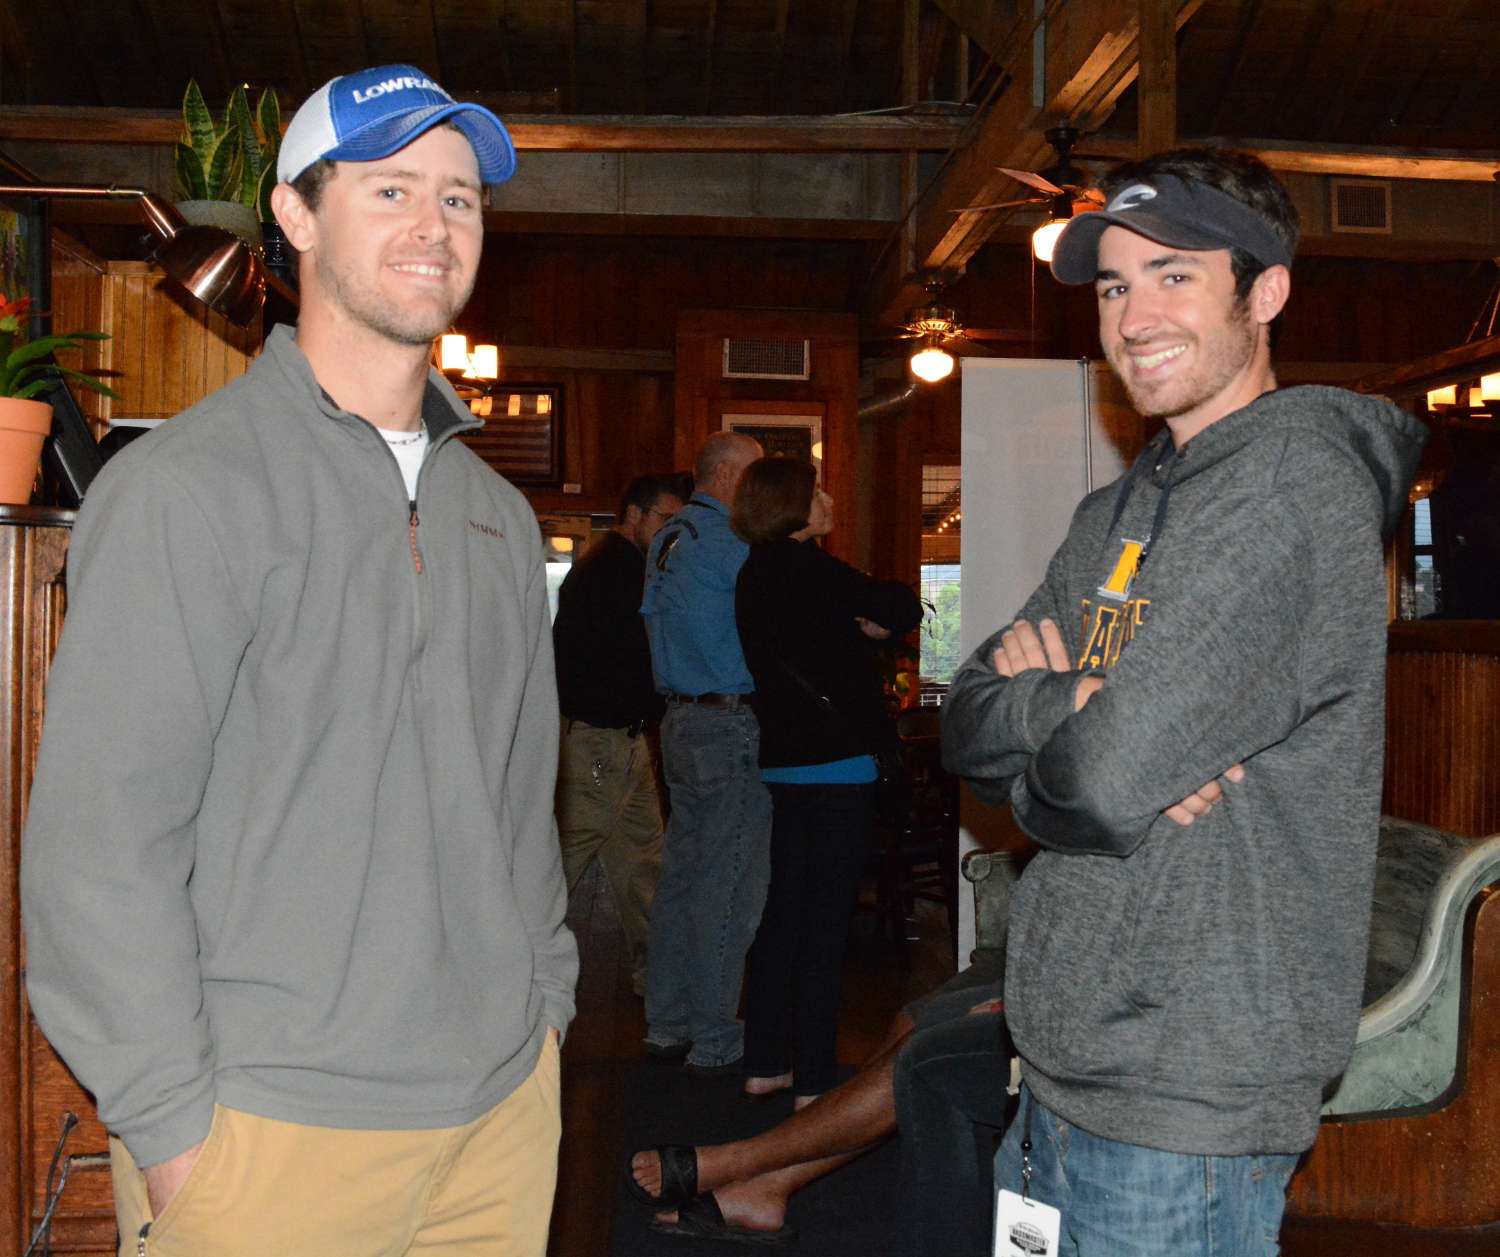 The first anglers in line are the youngest of the bunch. Matt Roberts and Lance Freeman are both former competitors in the Carhartt Bassmaster College Series Championship, and now here they are on the adult side.